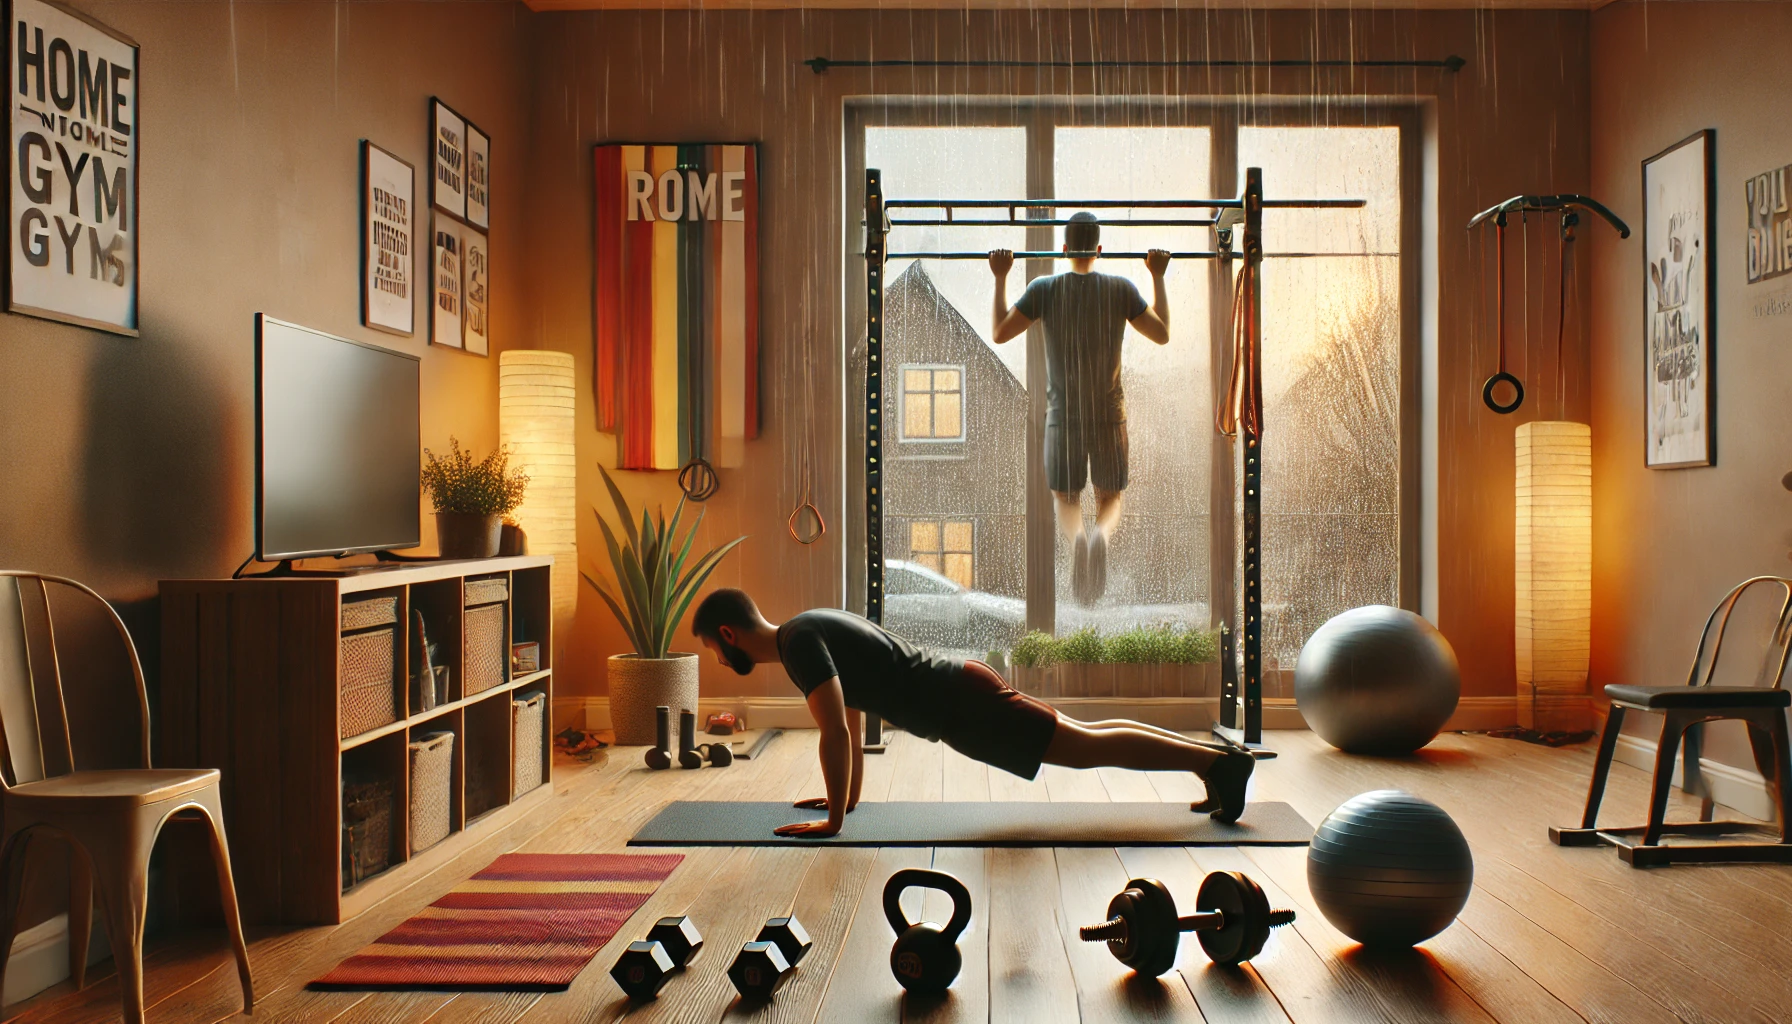 Rainy weather can make it tough to keep up with your workouts. But don’t let a little rain stop you from getting stronger and building muscle.